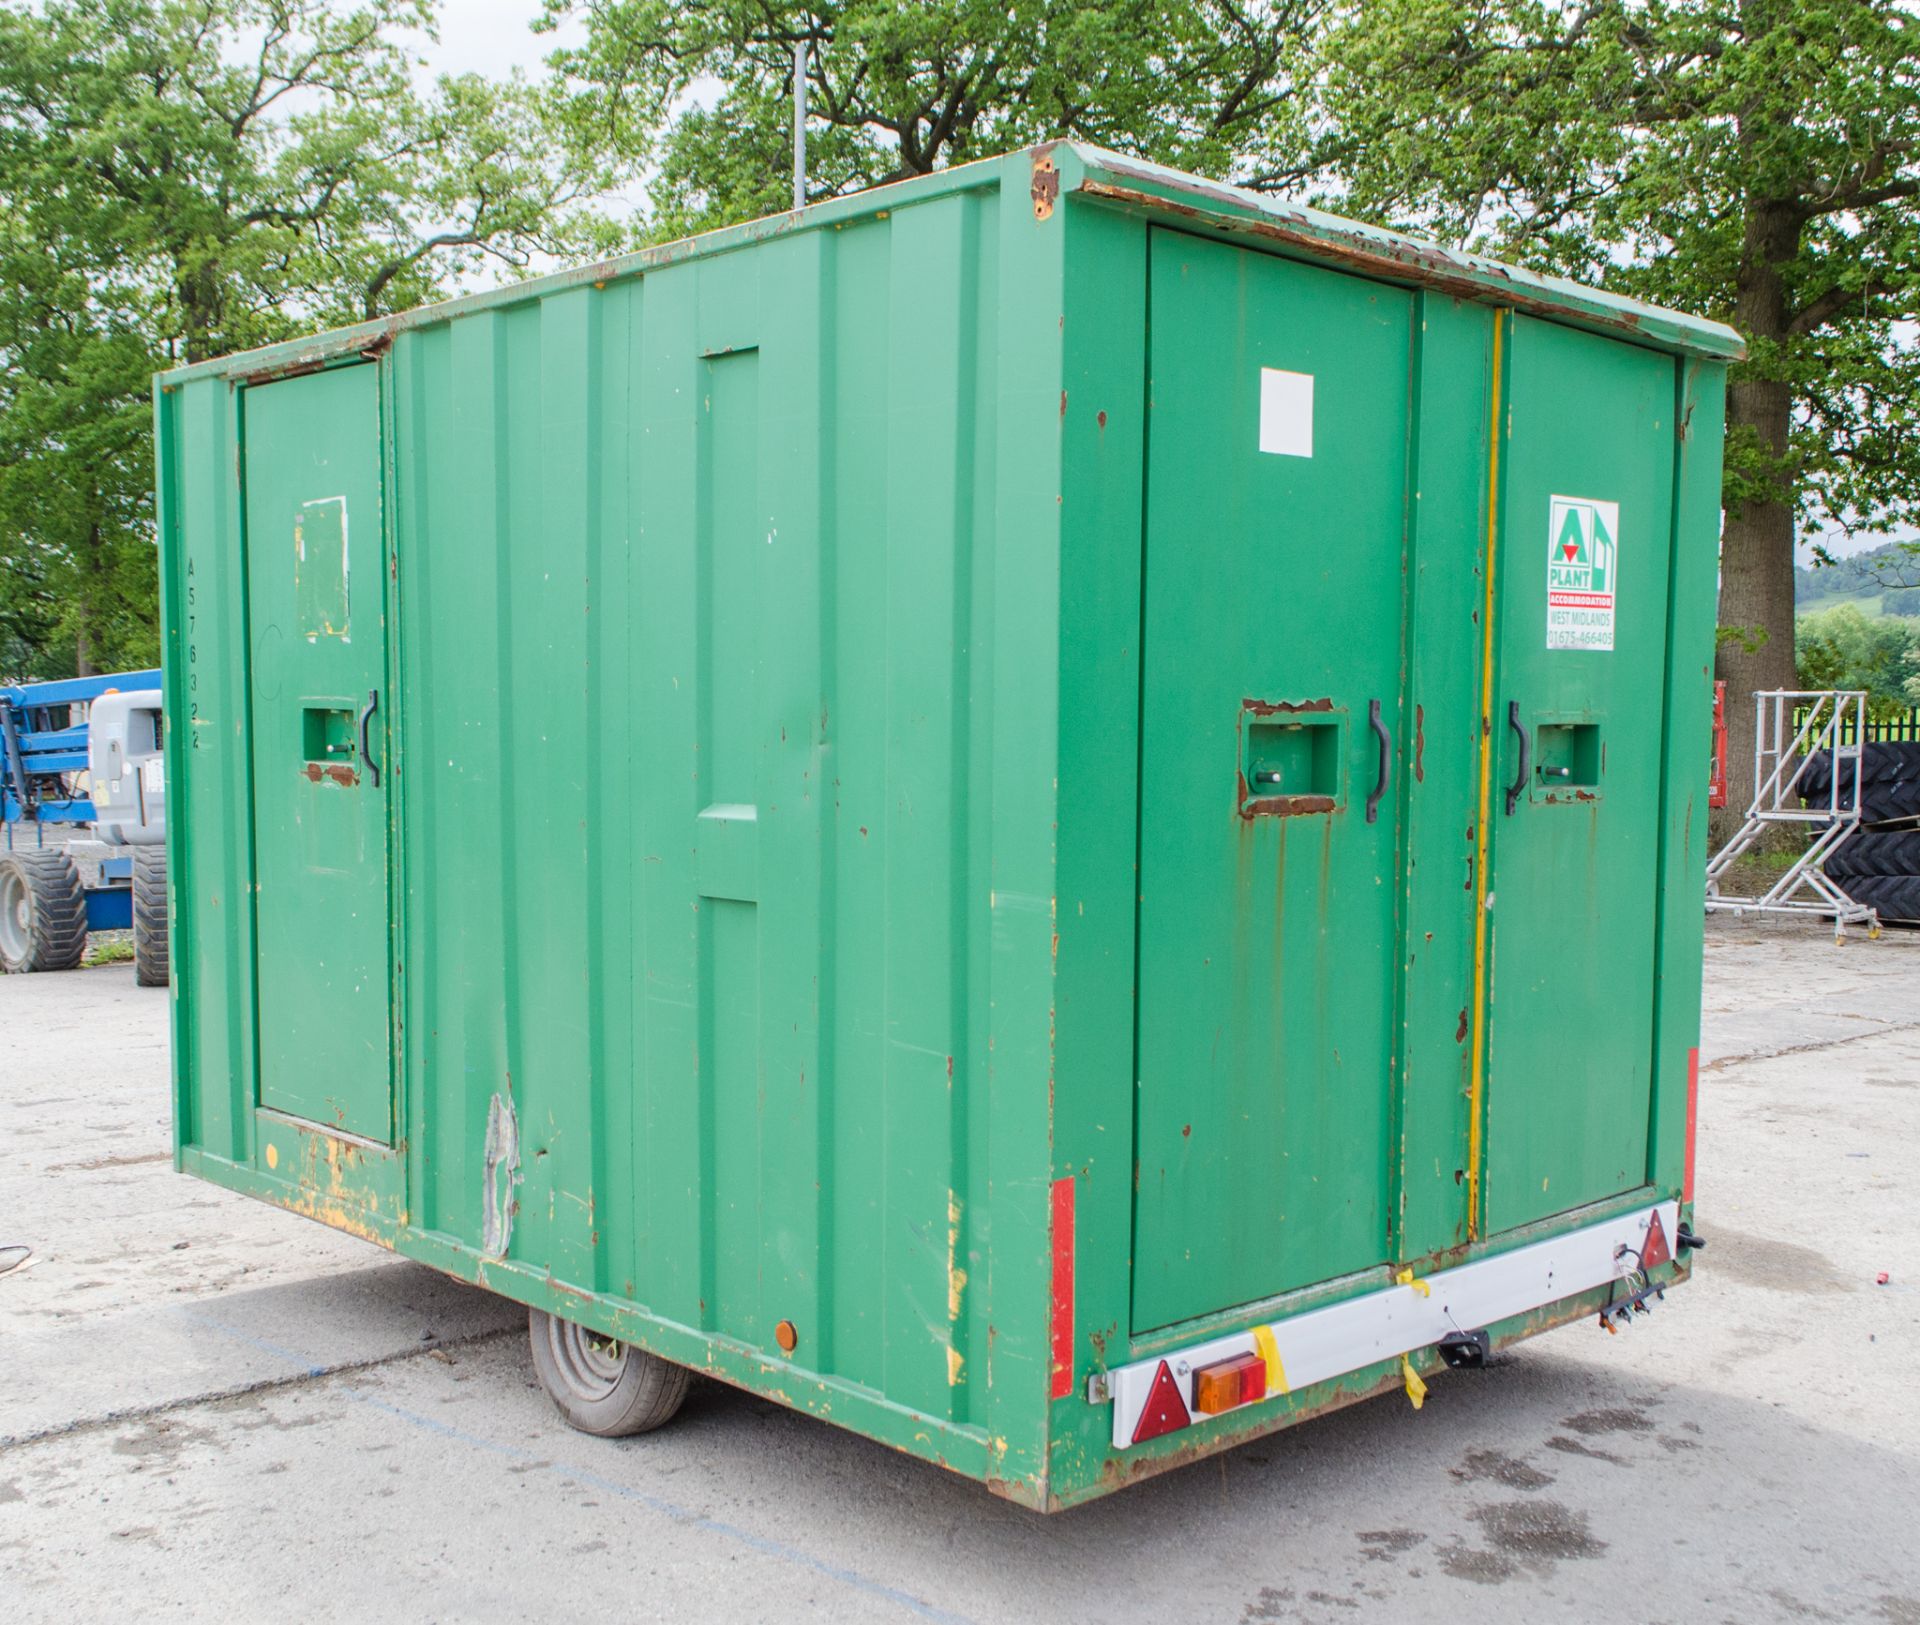 Groundhog 12 ft x 8 ft mobile welfare site unit Comprising of: canteen area, toilet & generator room - Image 4 of 9